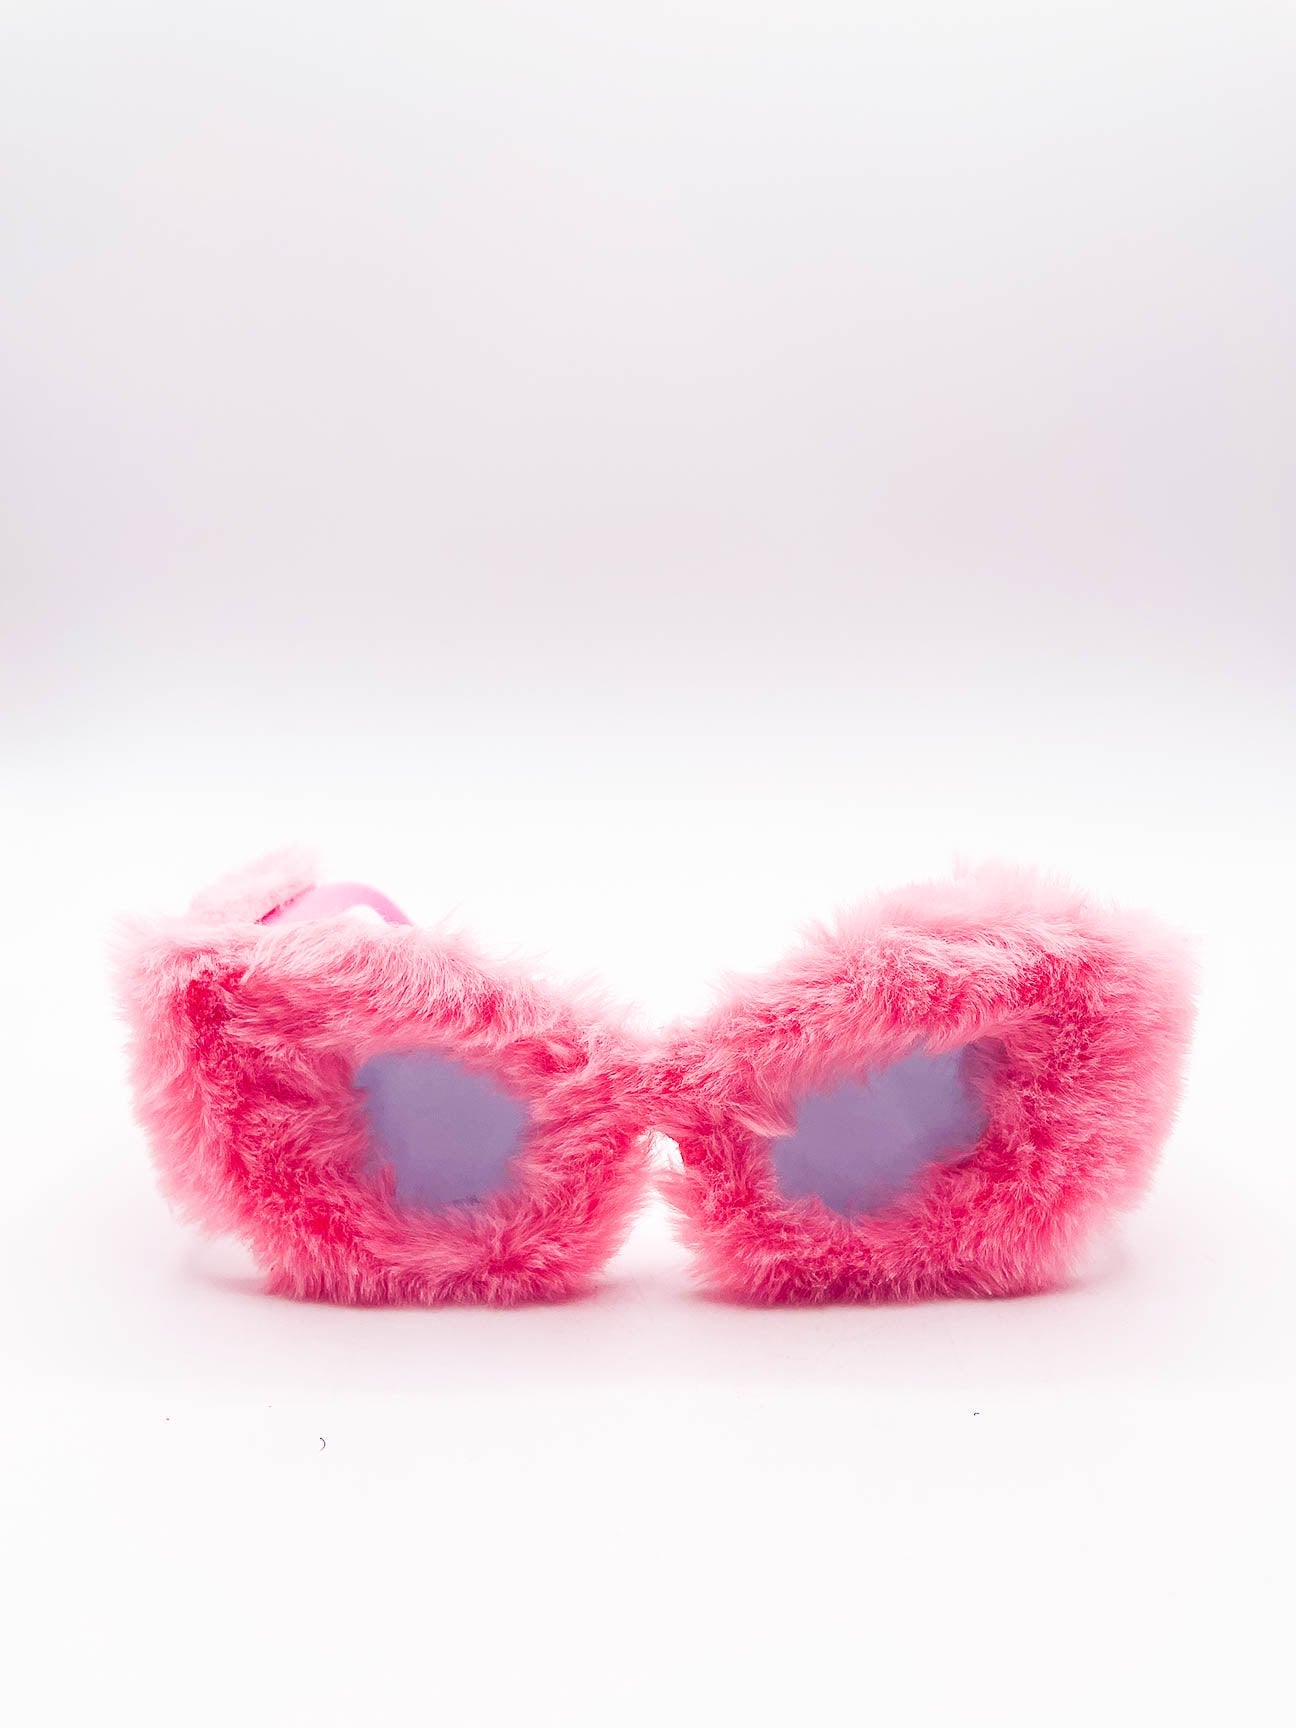 Faux fur novelty sunglasses in pink